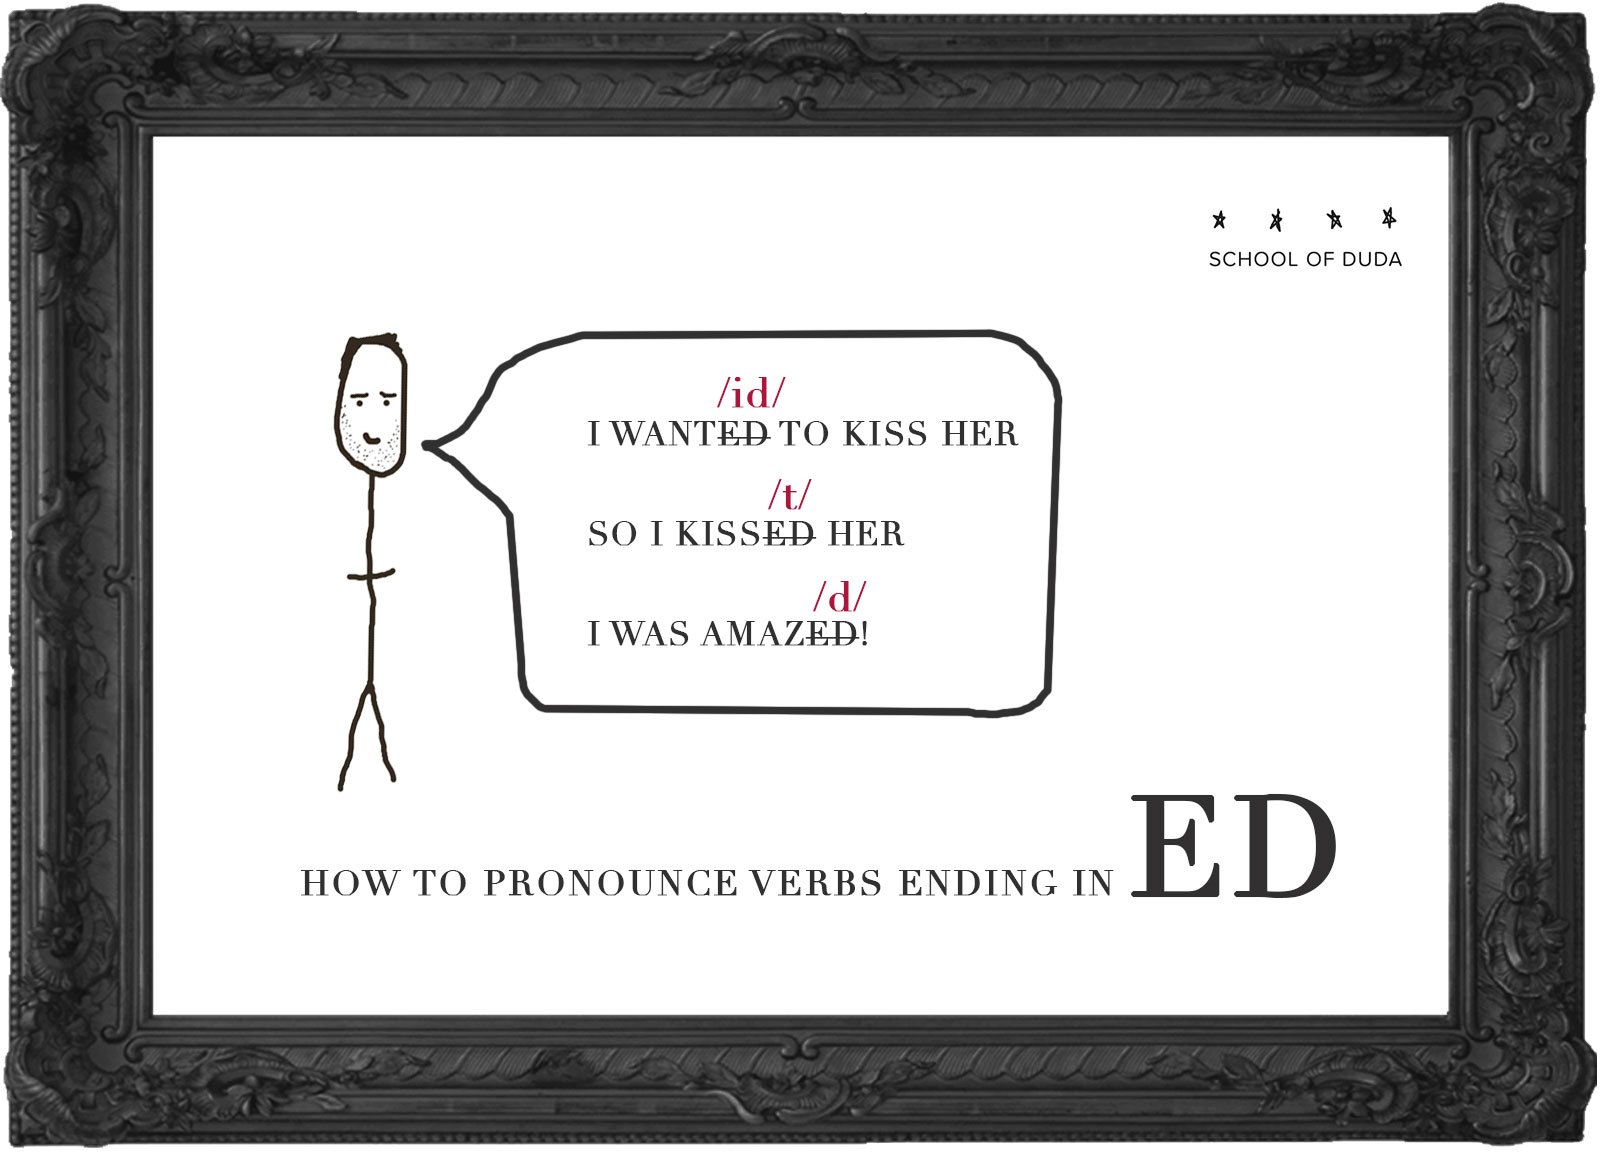 How to pronounce verbs ending in ED